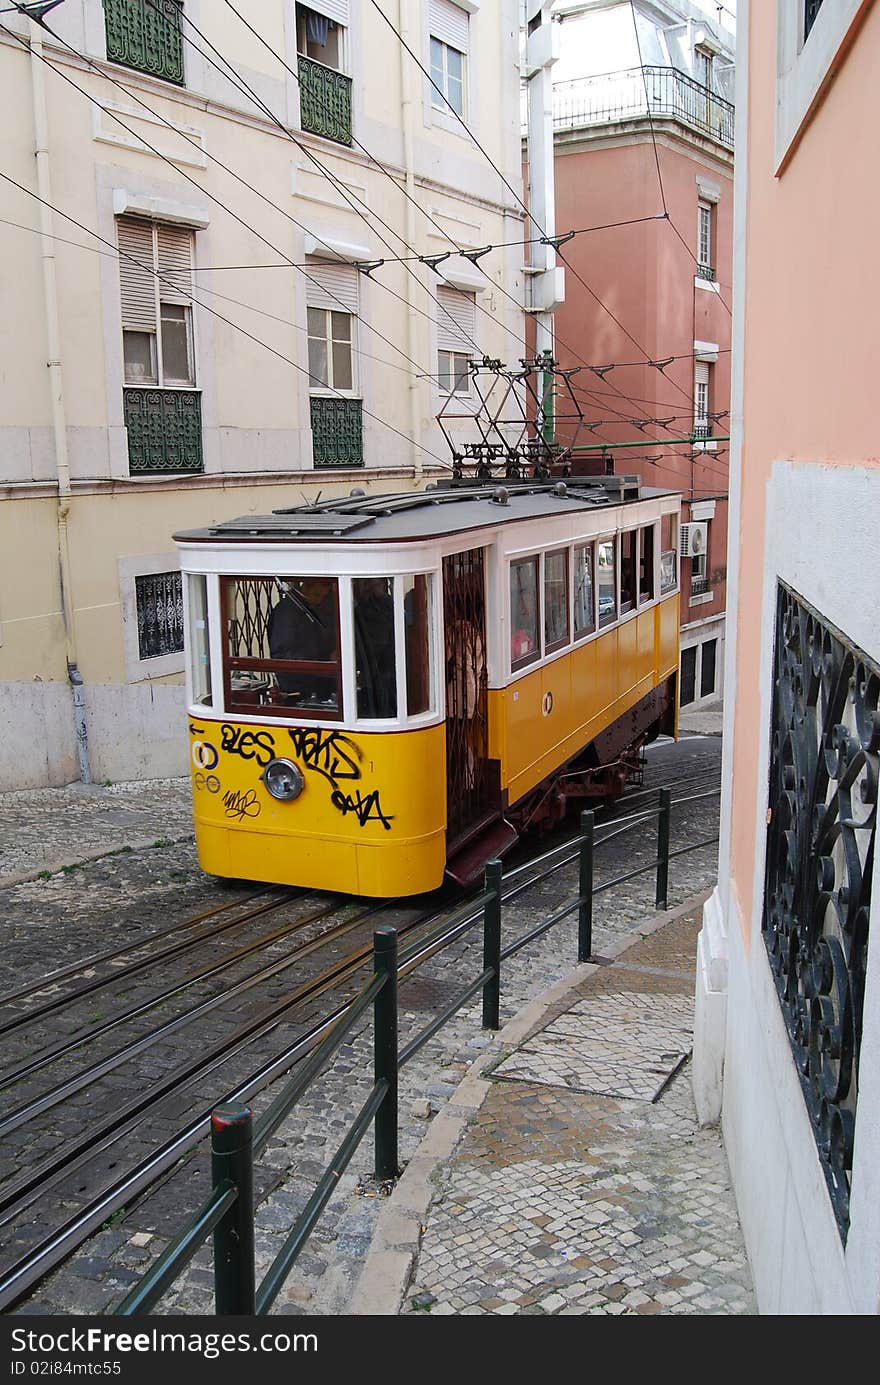 Typical Tram up a hill in Lisbon, Portugal. Typical Tram up a hill in Lisbon, Portugal